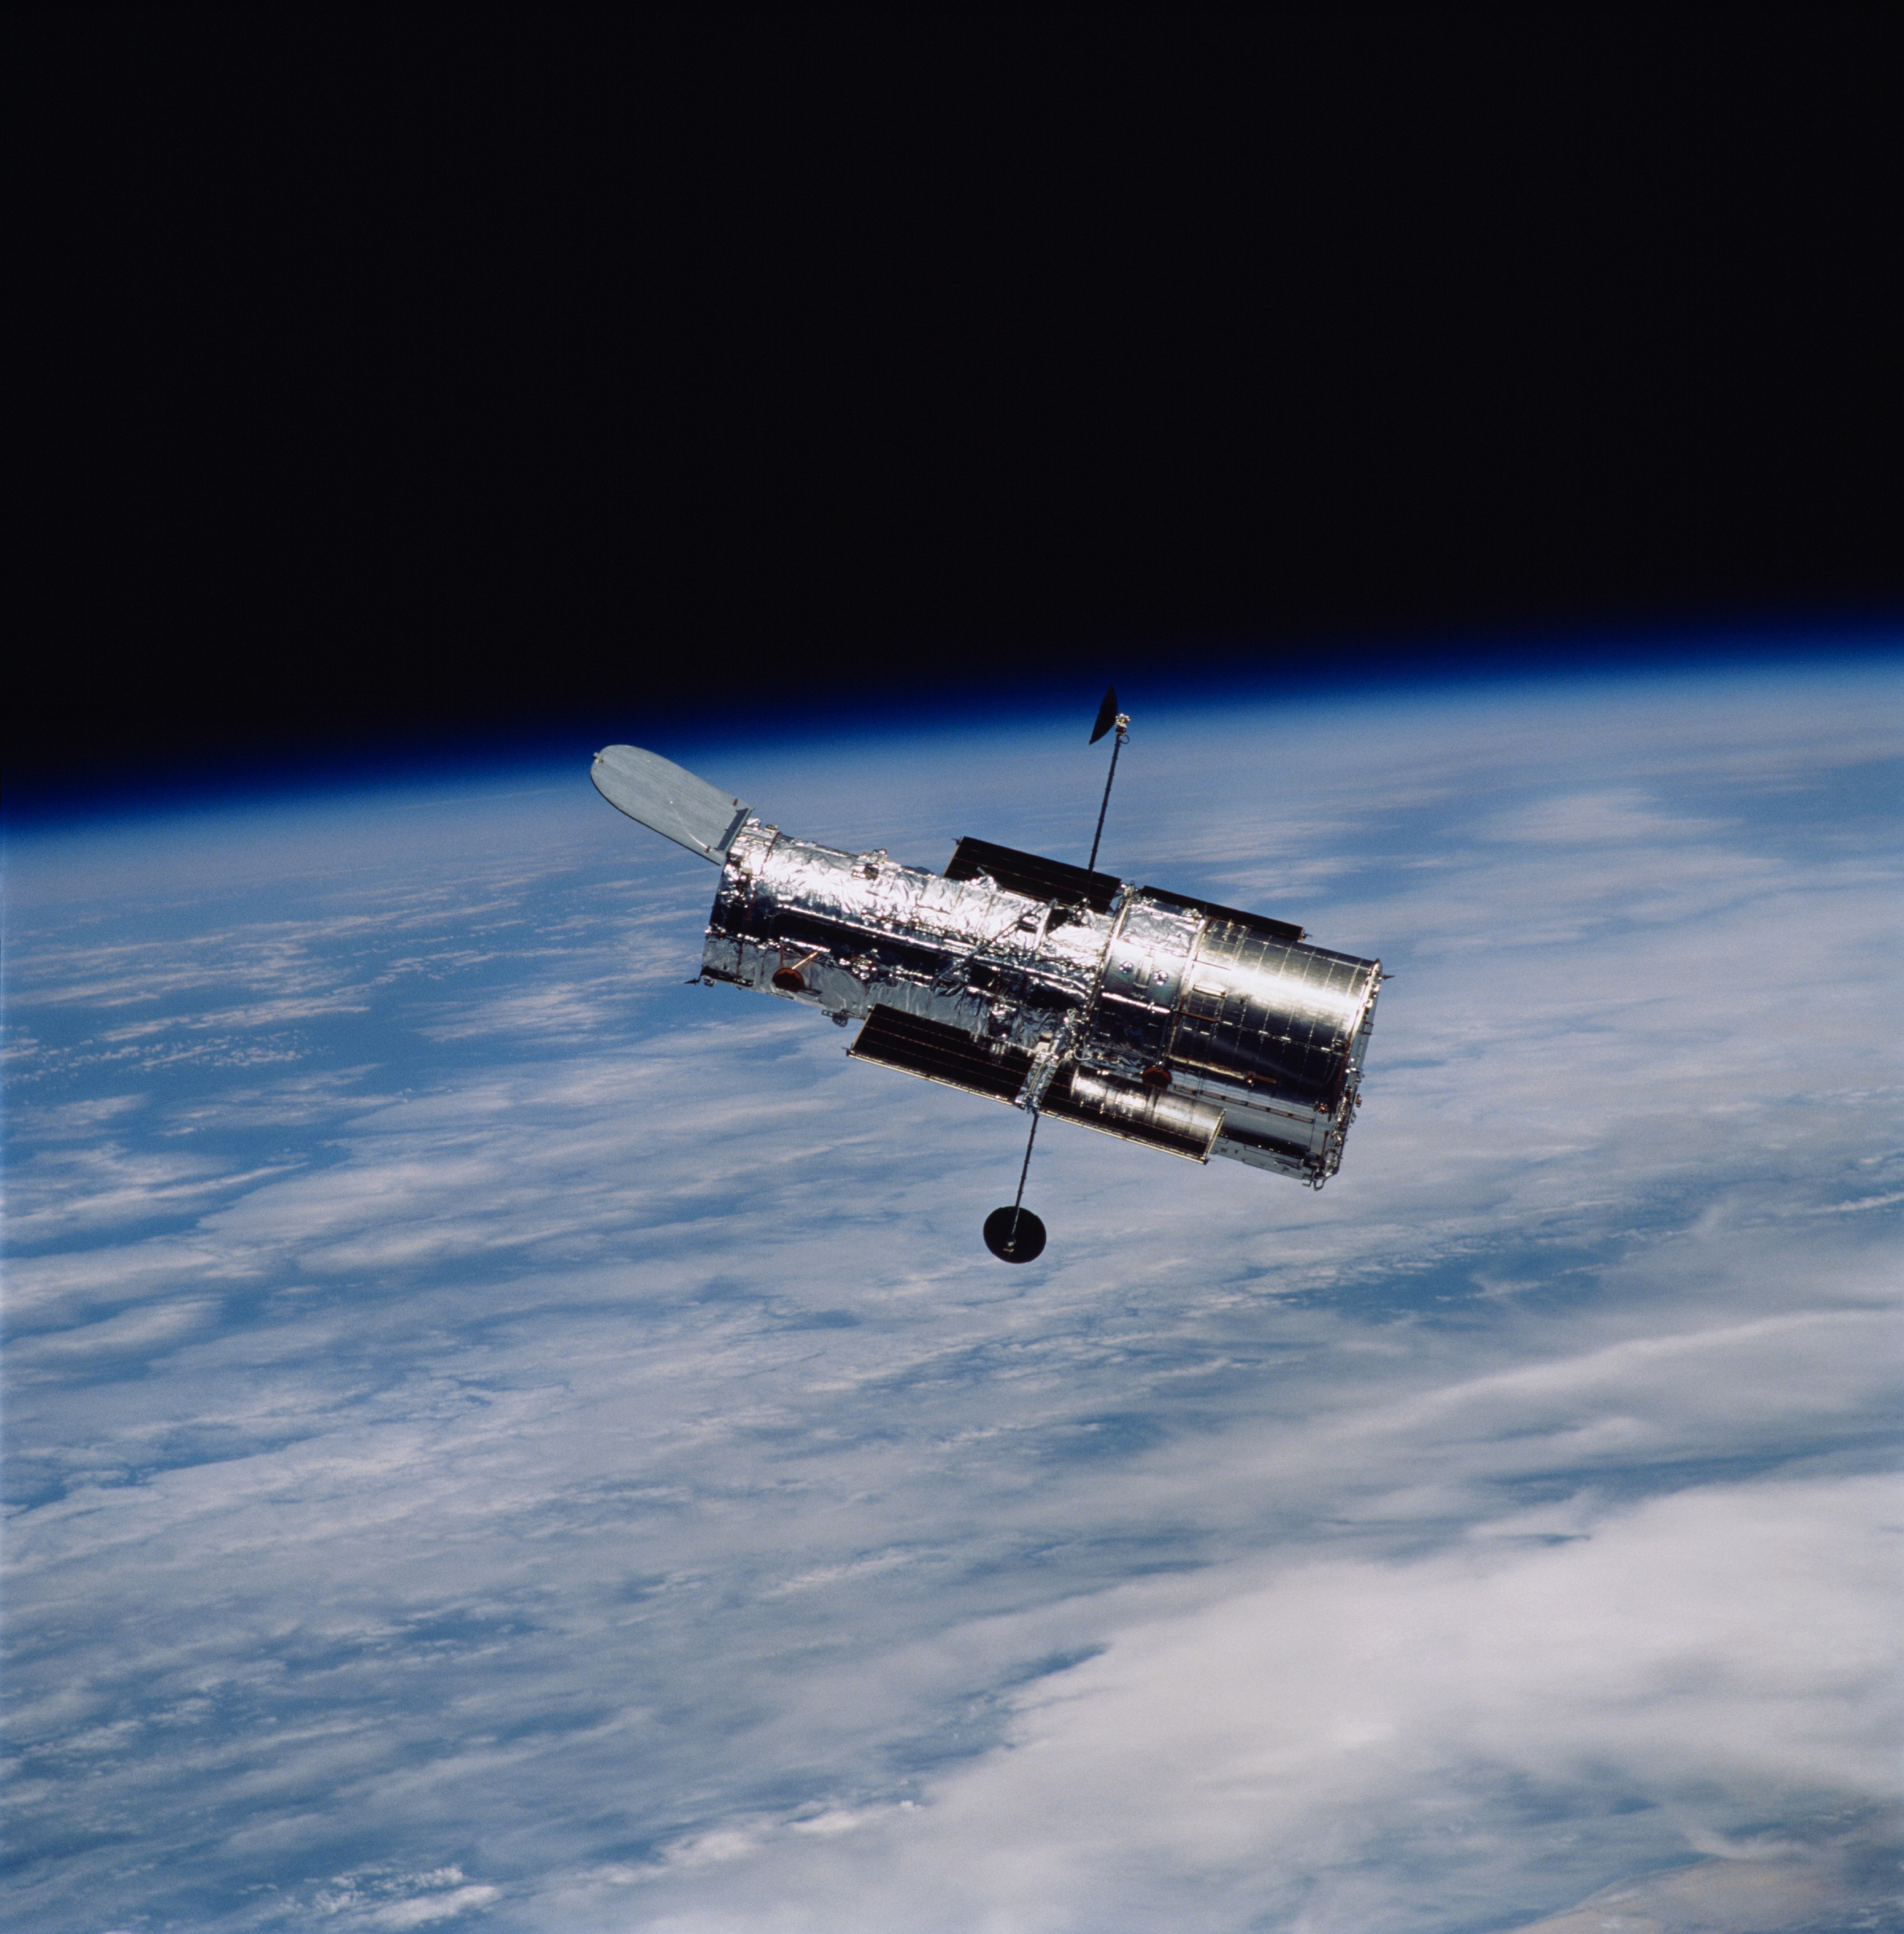 The Hubble Space Telescope is in orbit above Earth